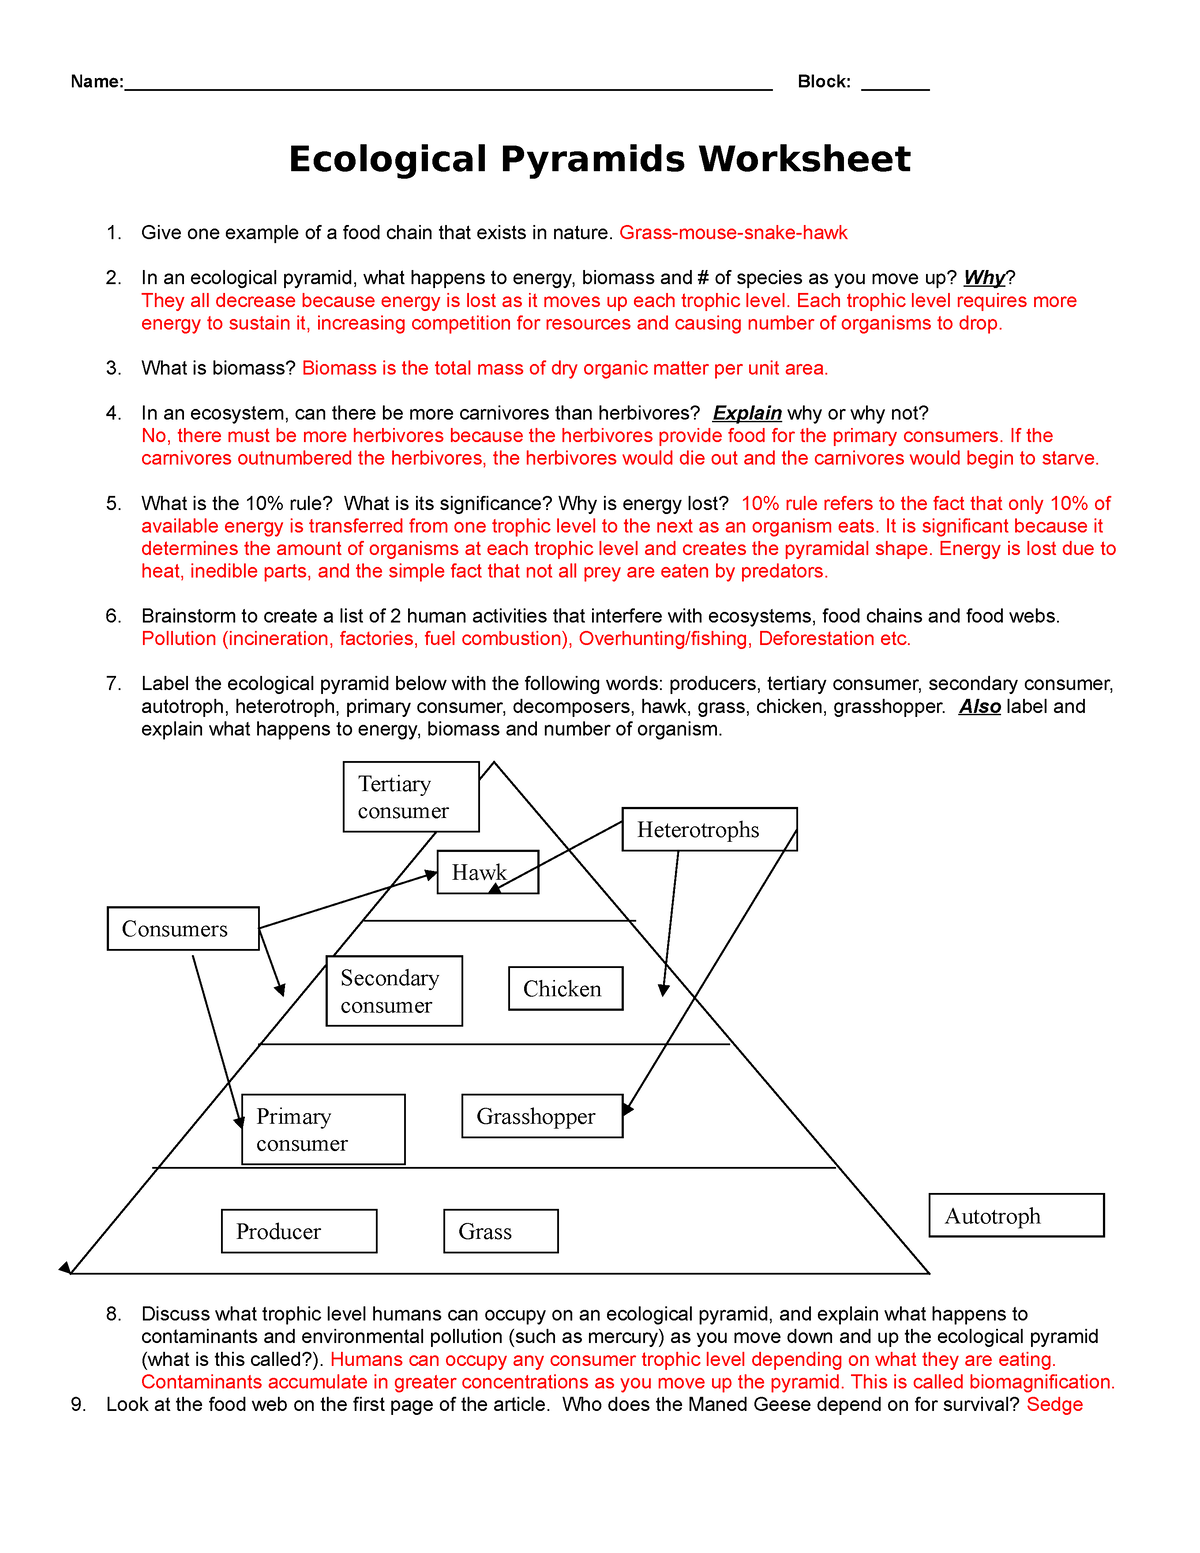 Food Chains Food Webs And Energy Pyramid Worksheet Answer Key Pdf